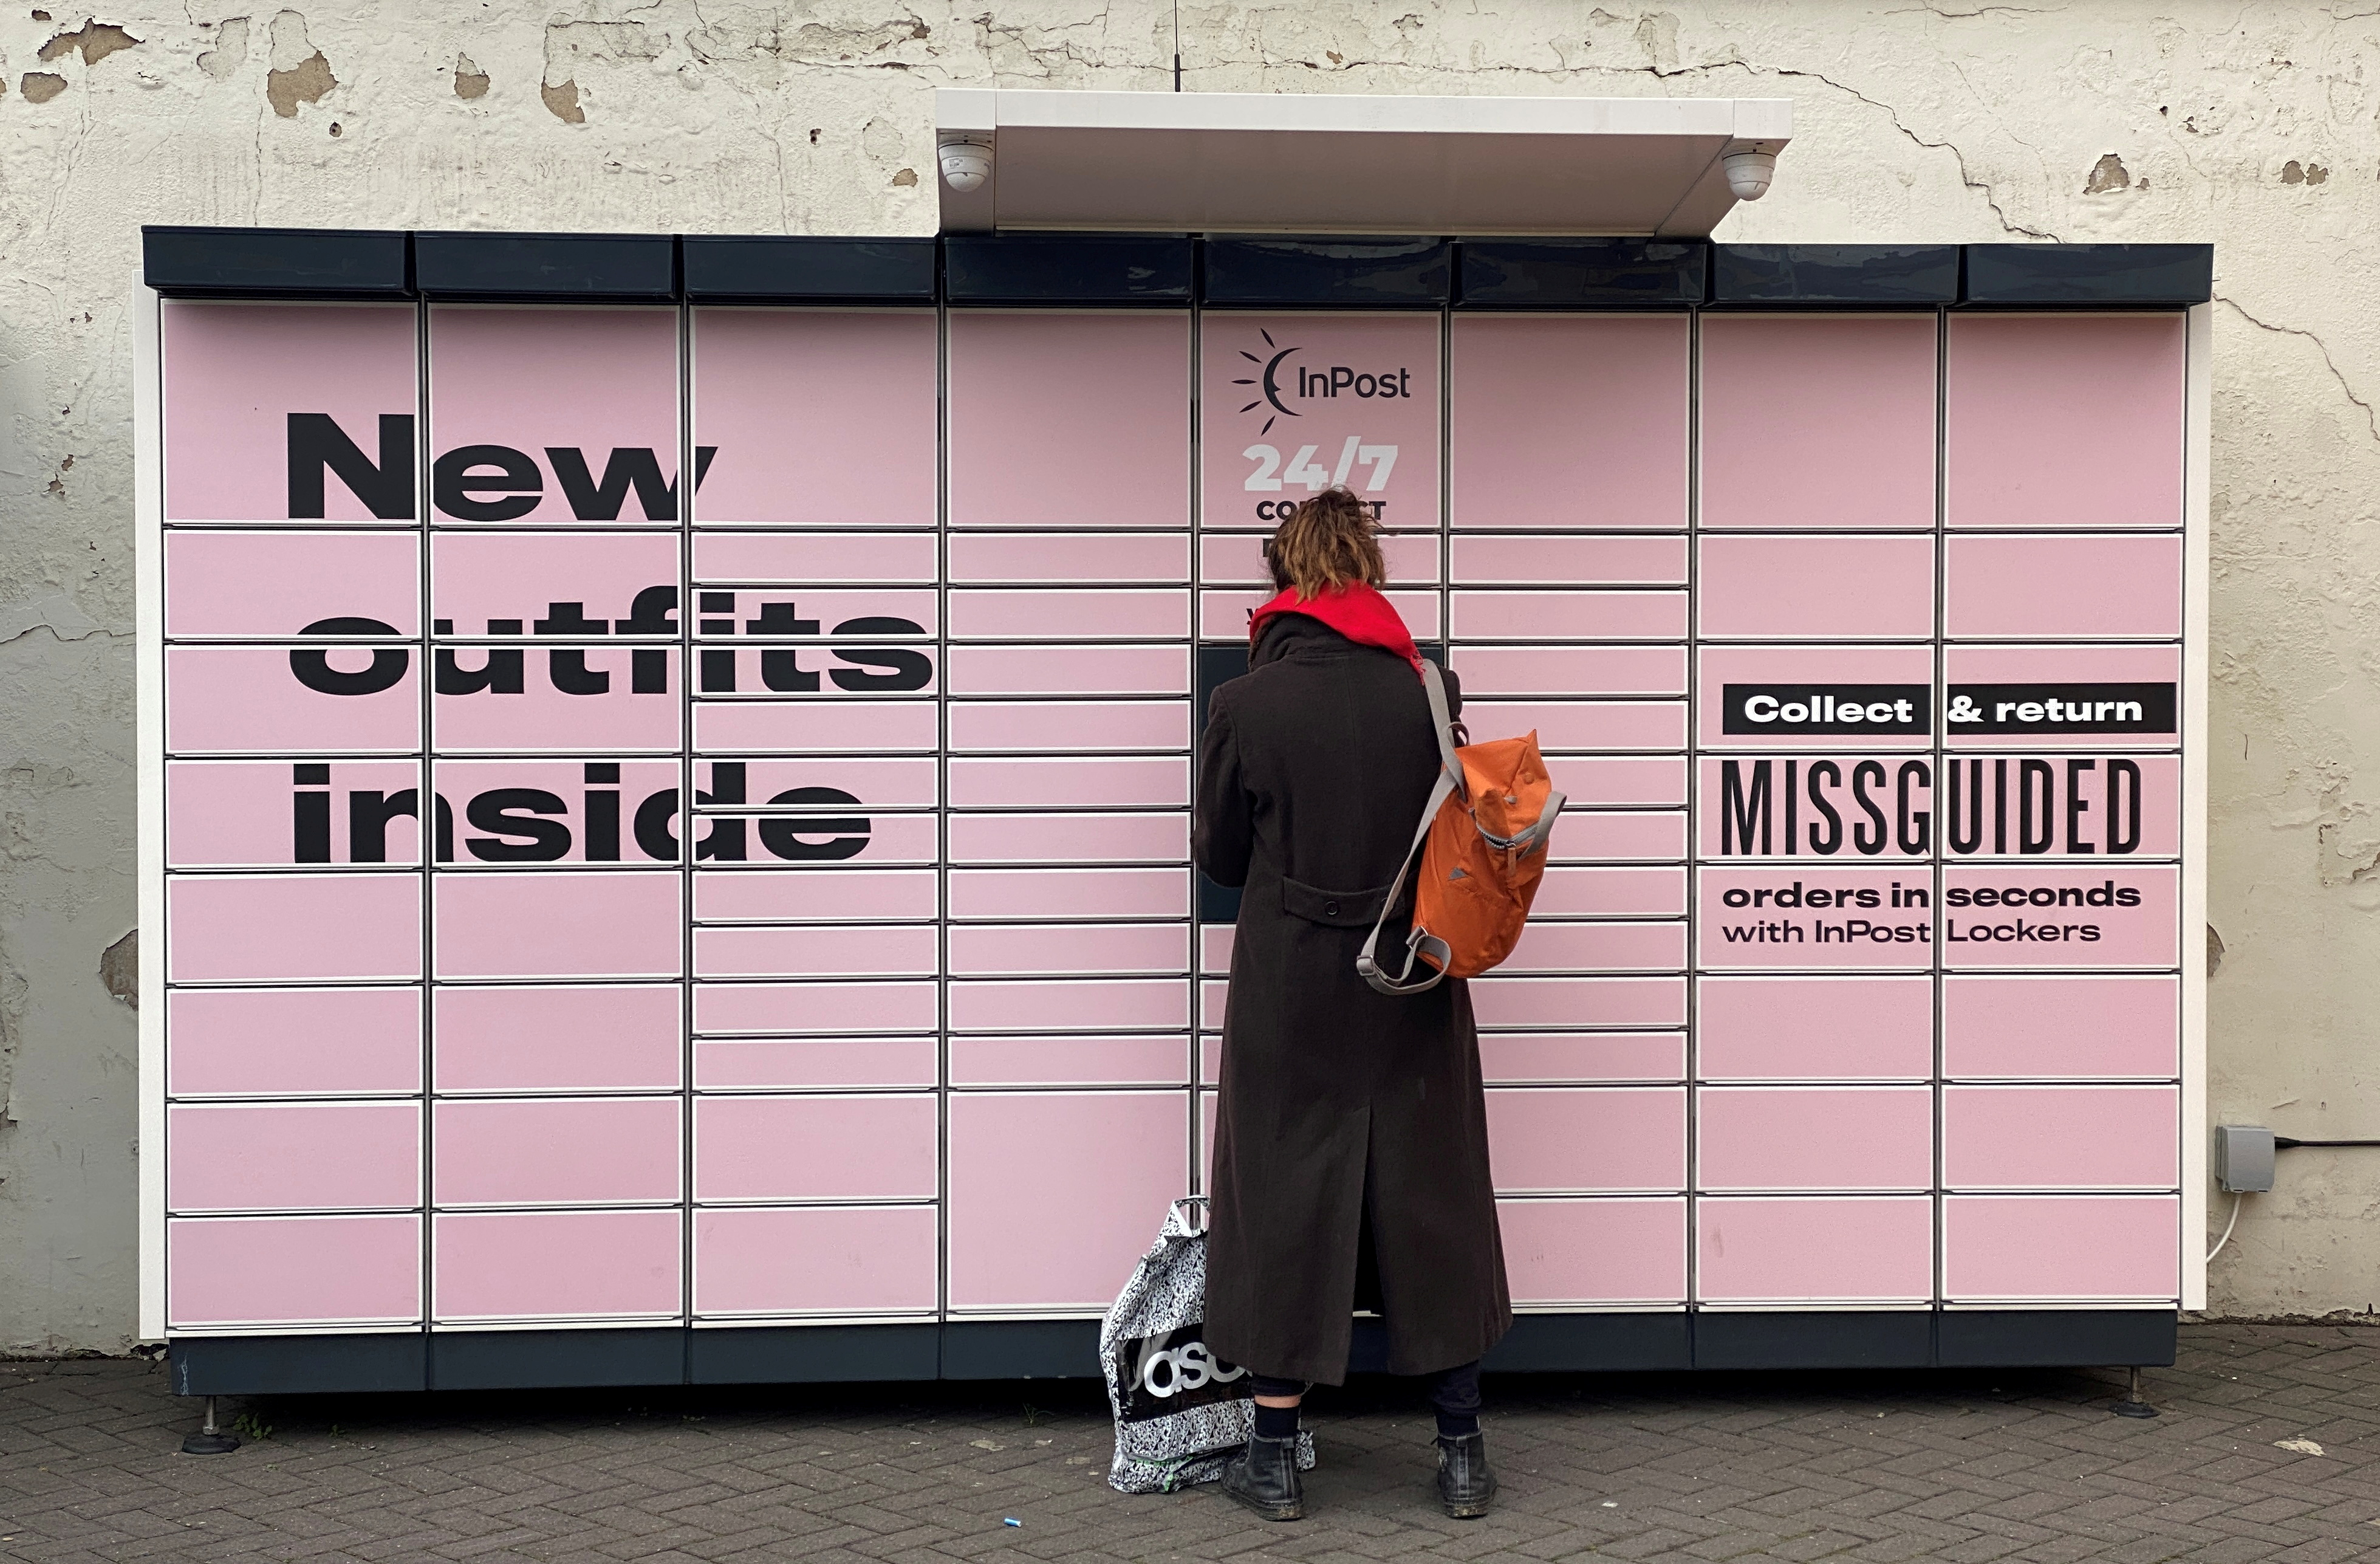 A woman stands at an InPost locker in Hackney, London